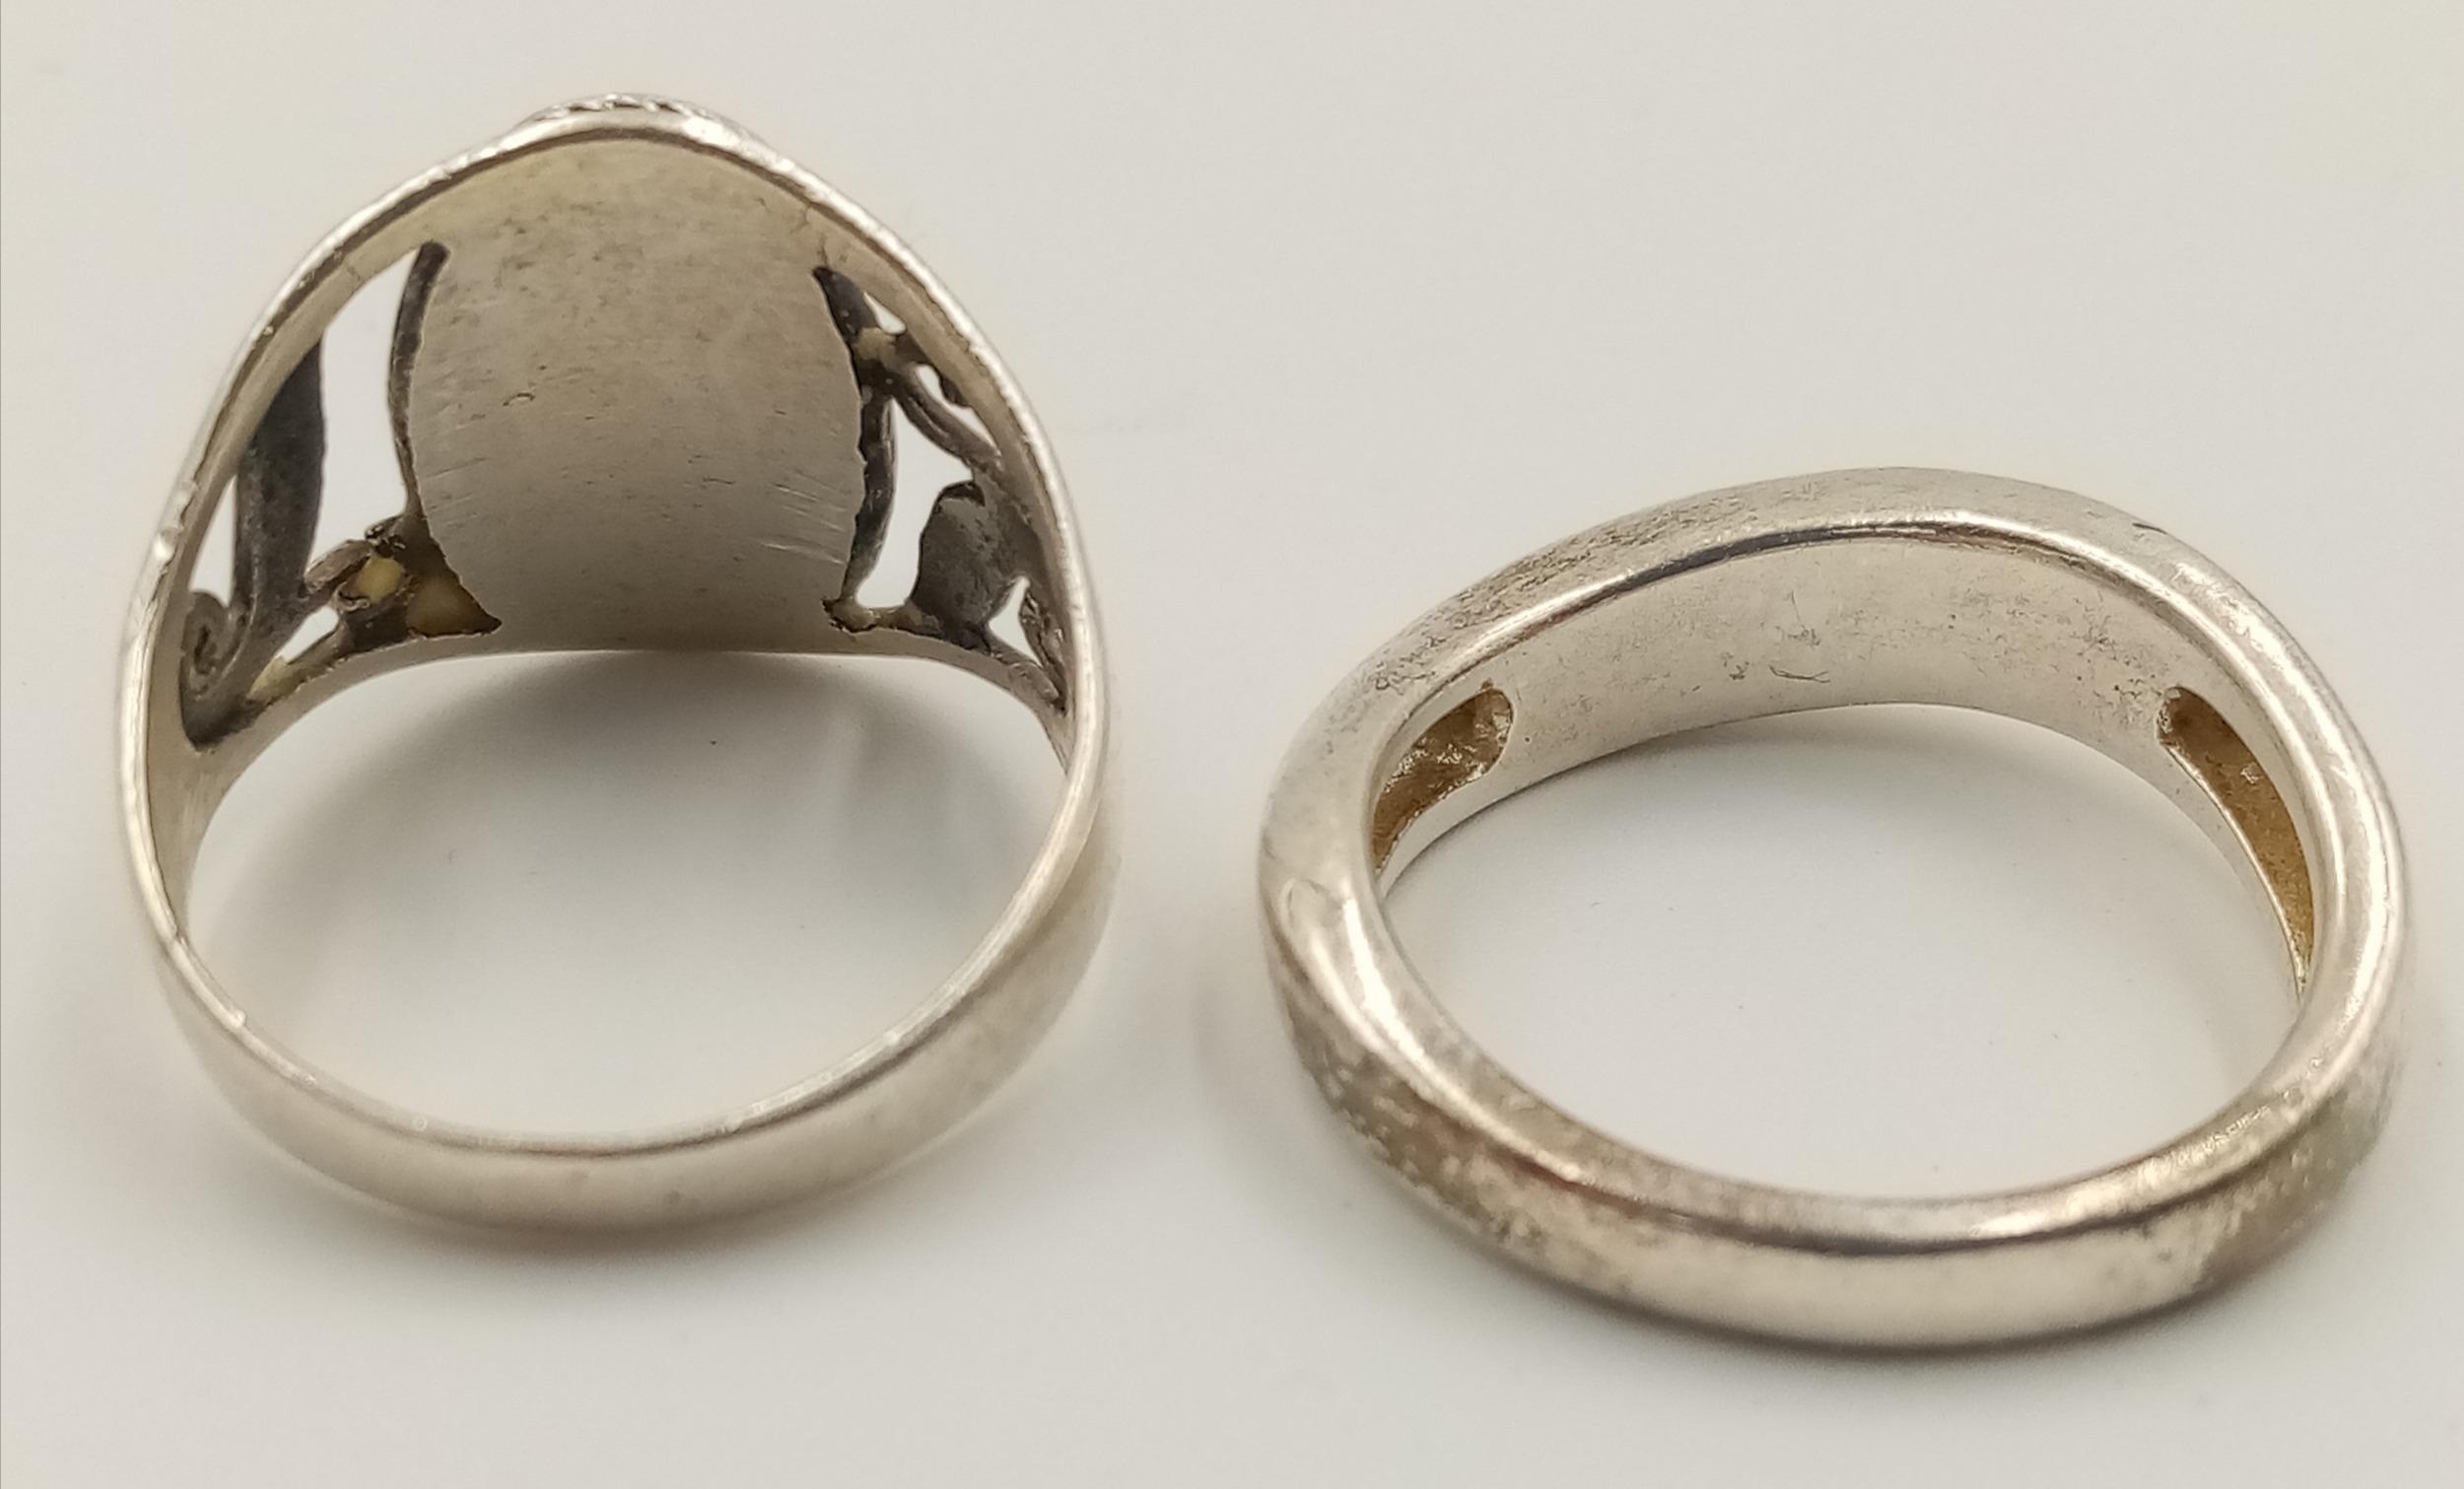 2 X STERLING SILVER MOTHER OF PEARL RINGS. Both size M, 7.2g total weight. Ref: SC 8095 - Image 2 of 4